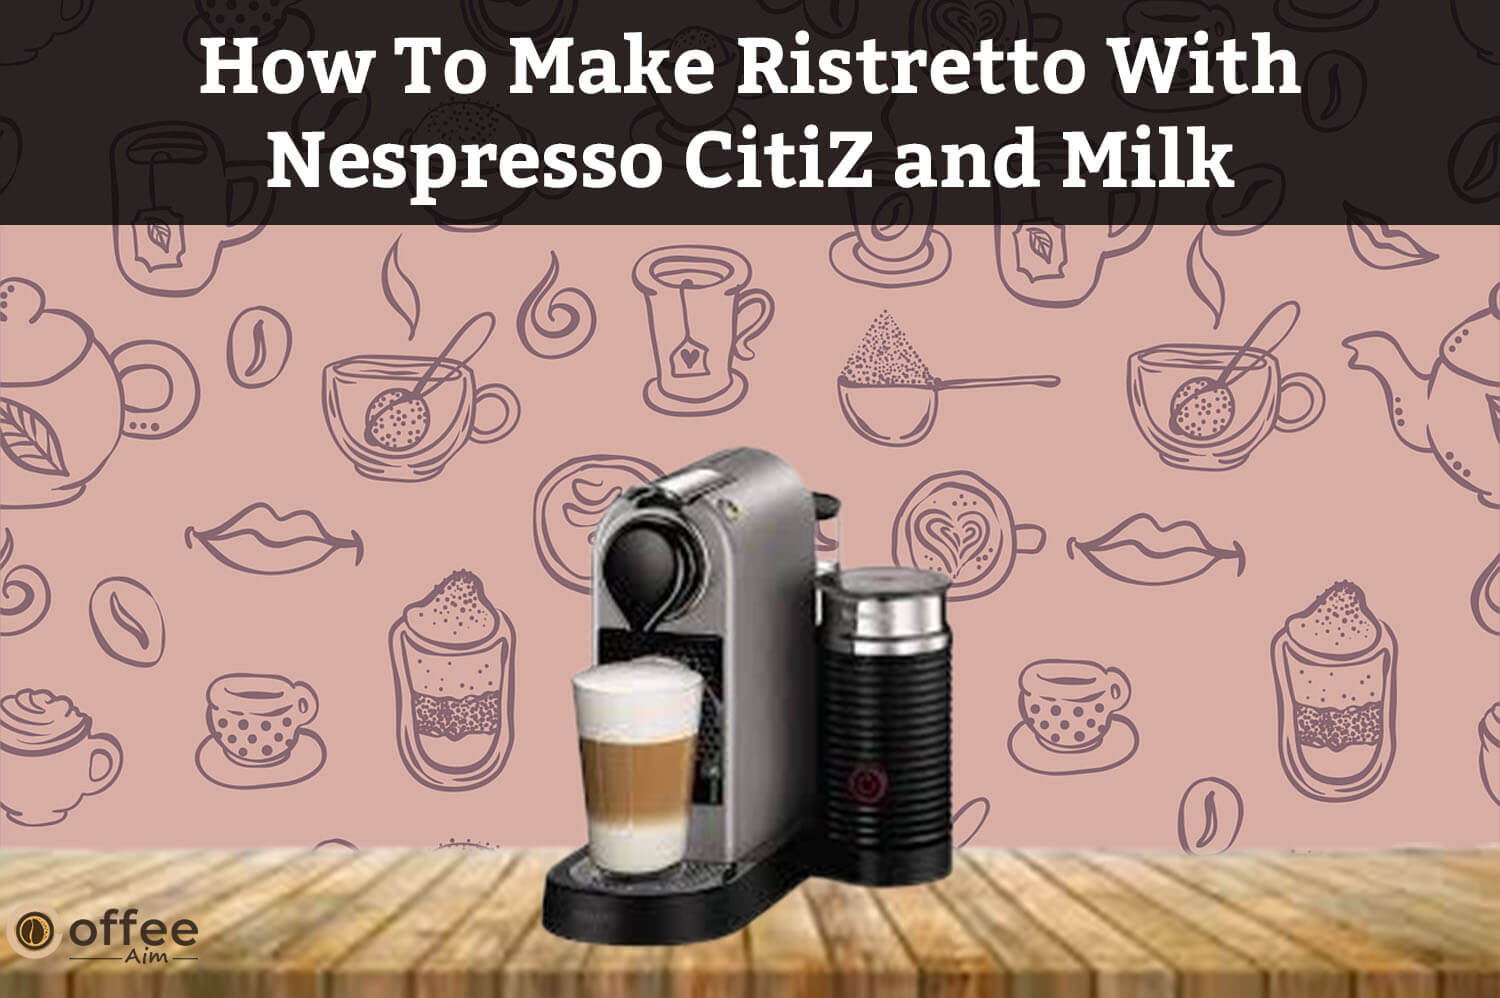 Featured image for the article "How To Make Ristretto With Nespresso CitiZ and Milk"